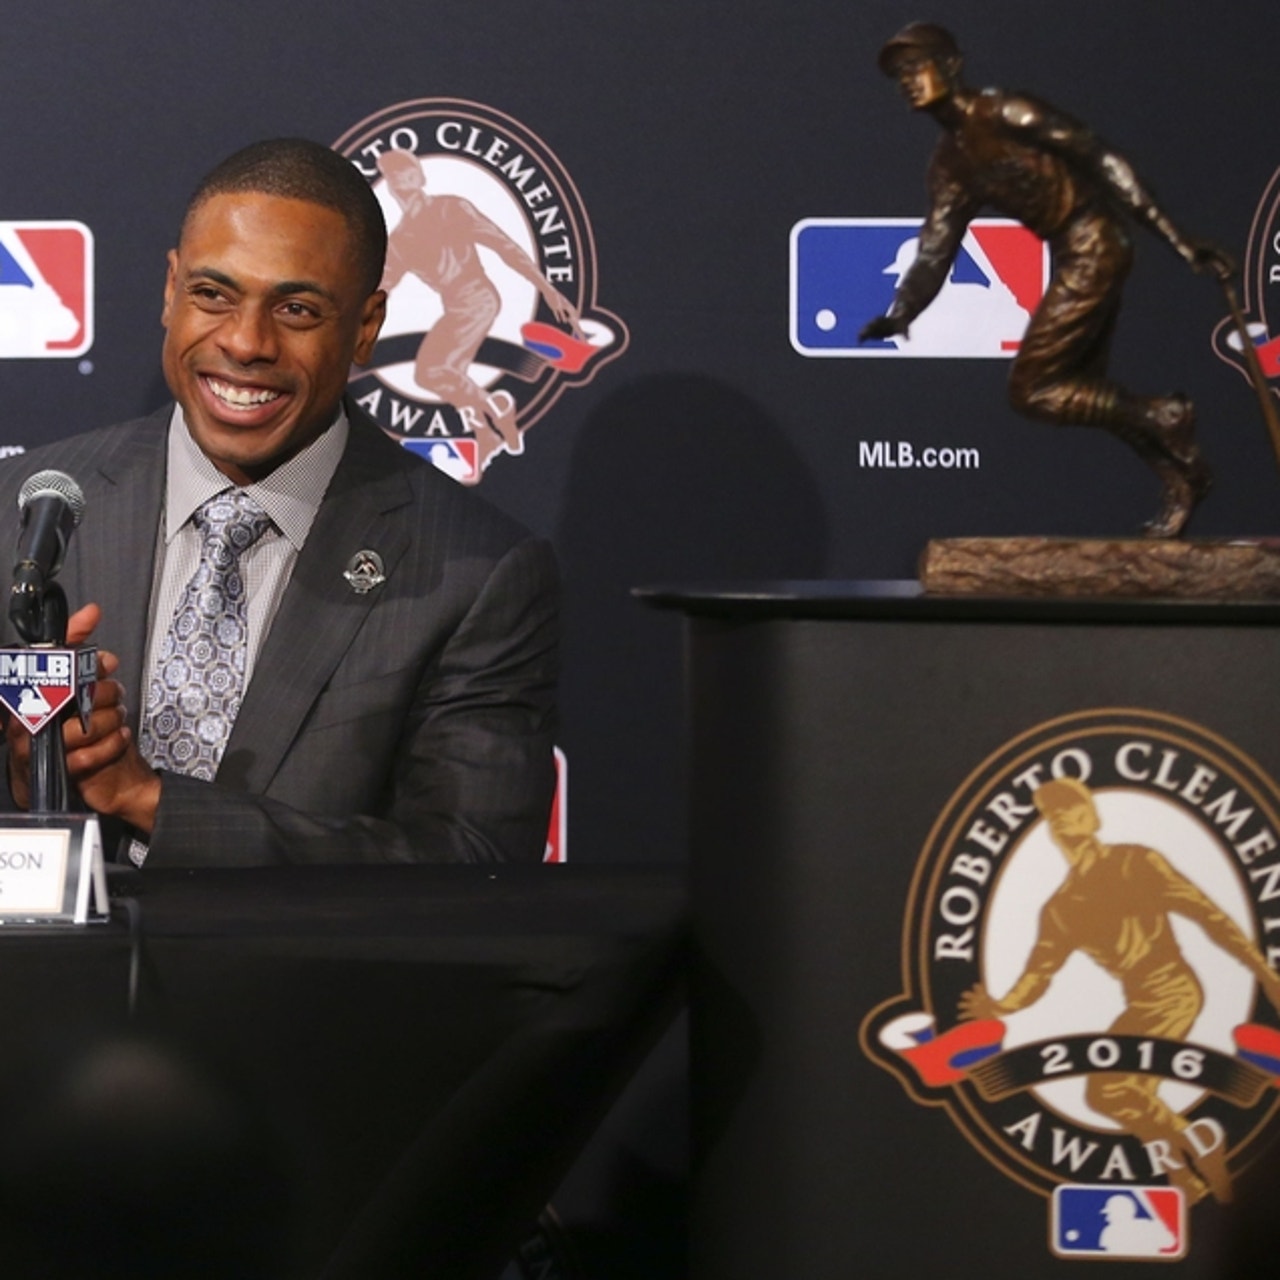 Outfielder Curtis Granderson of the USA World Baseball Classic